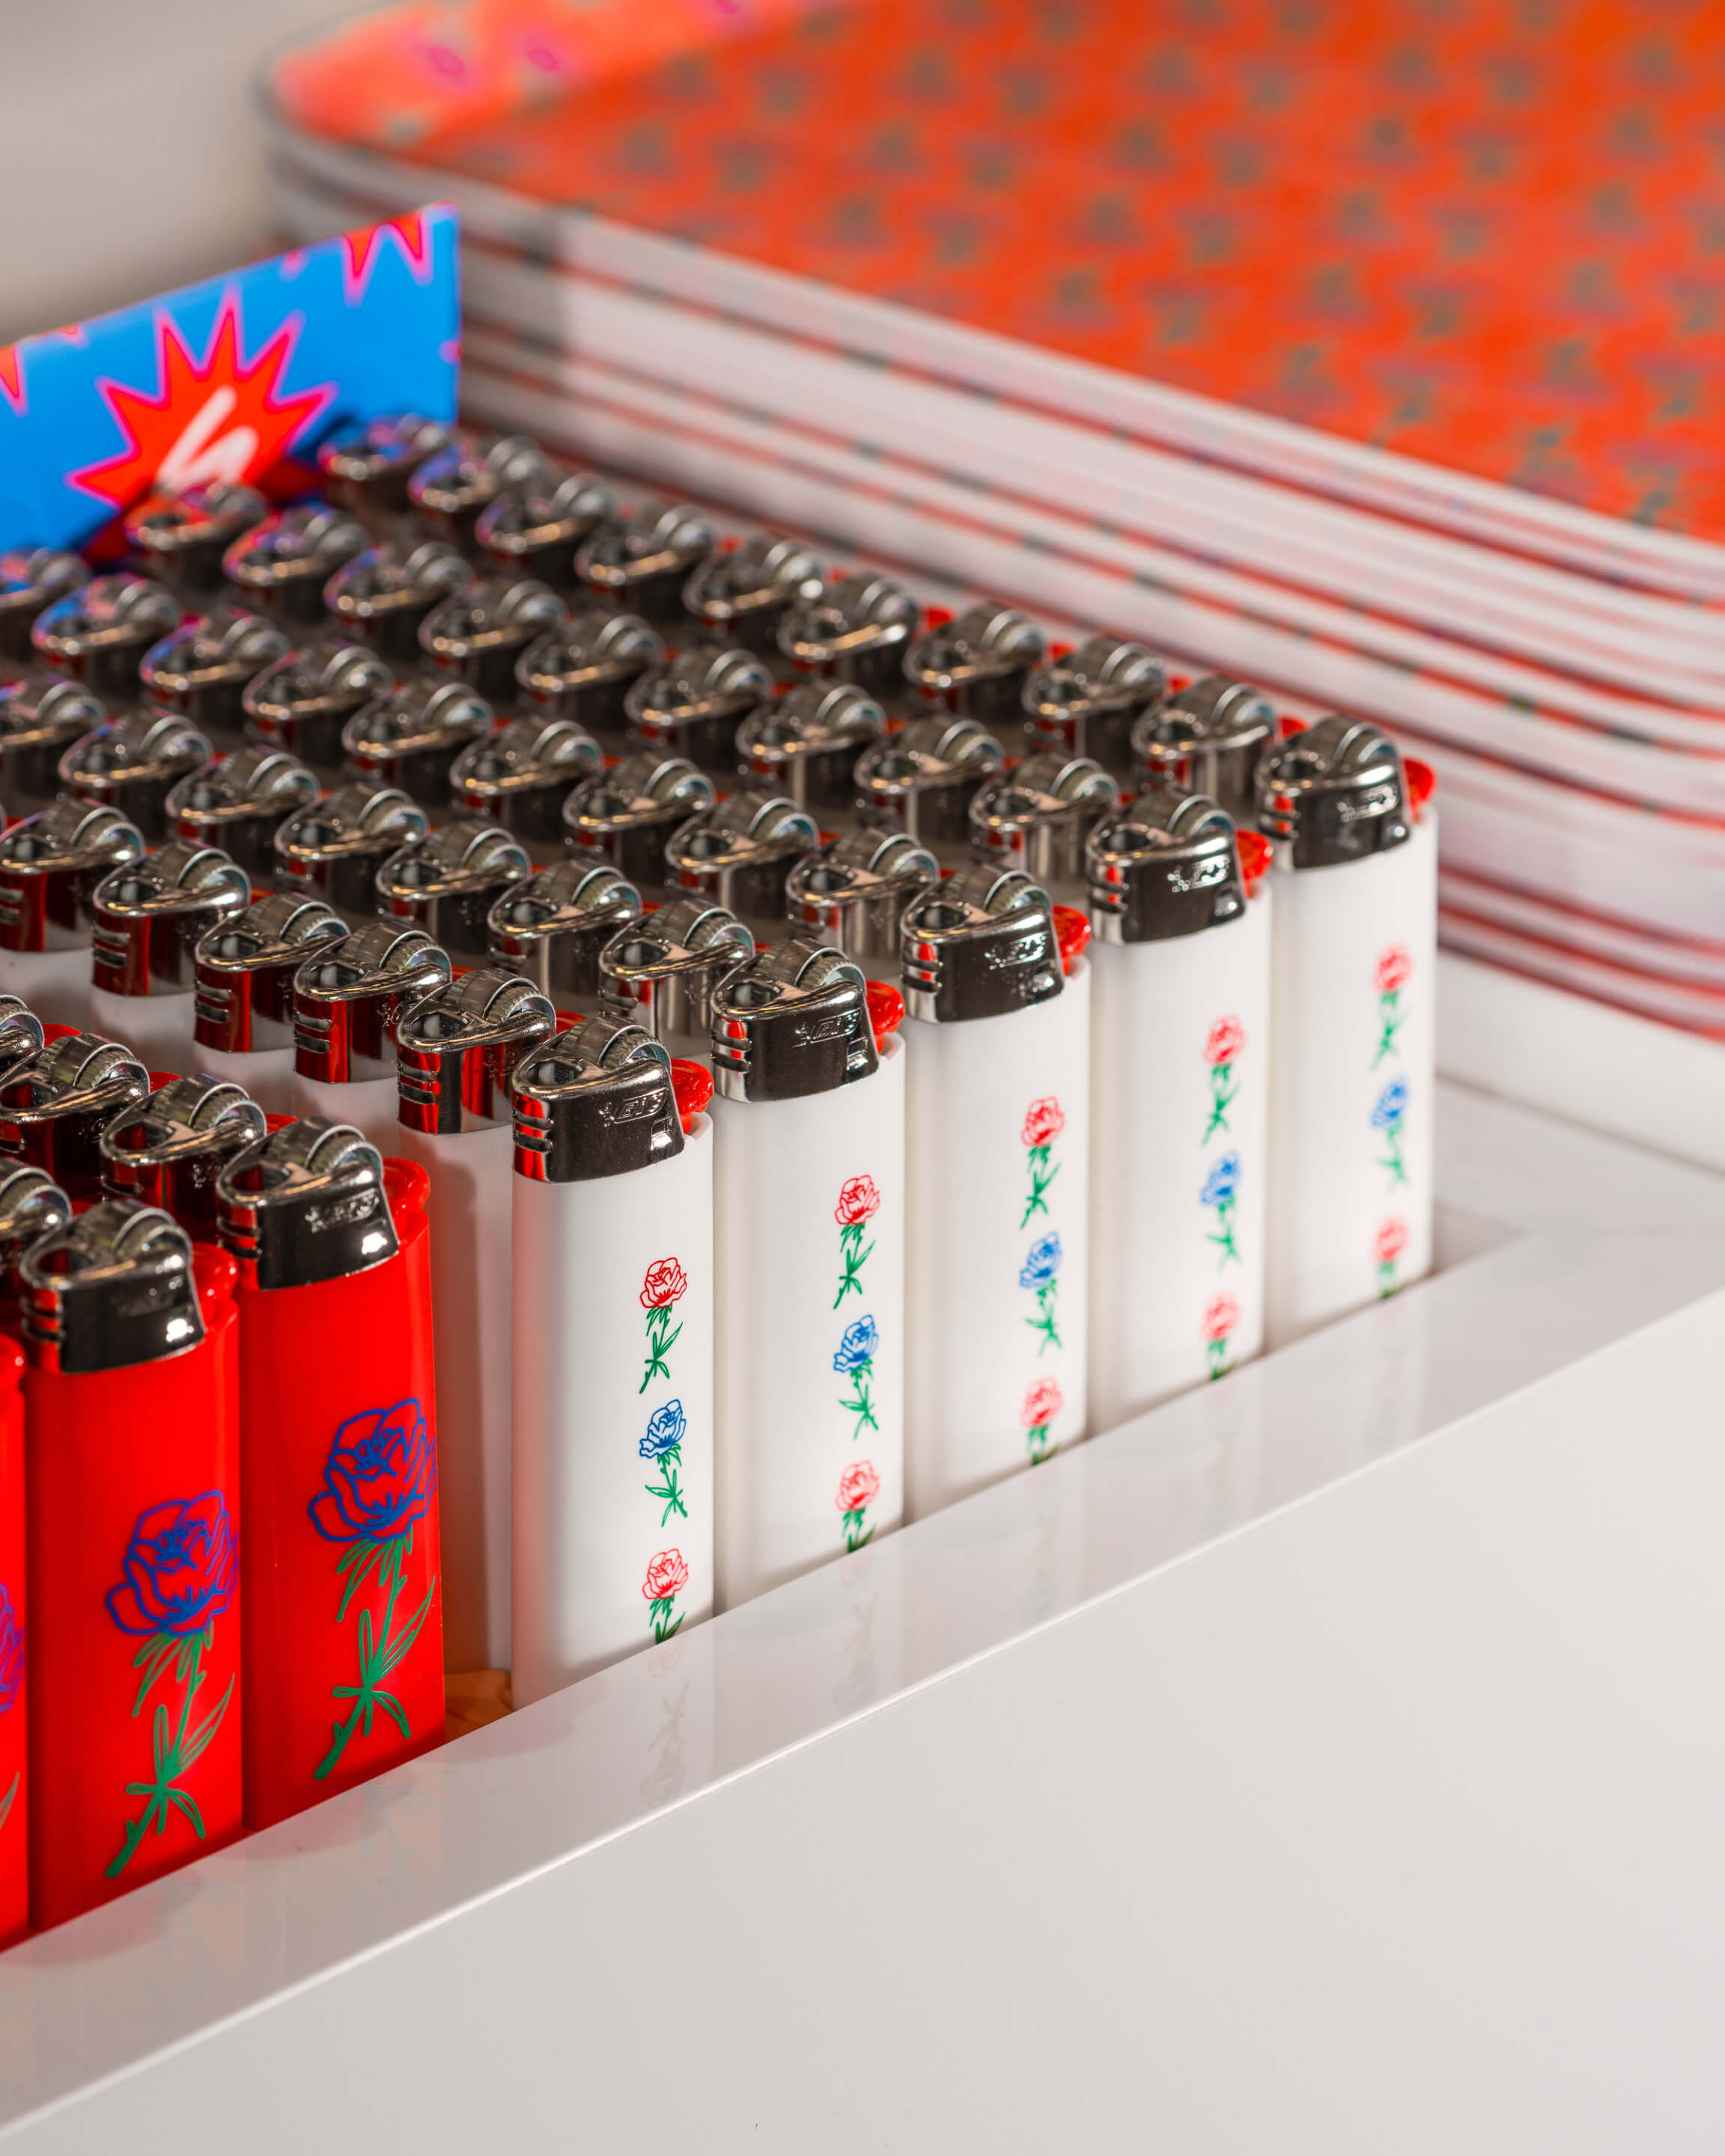 a display of branded lighters inside of a Superette